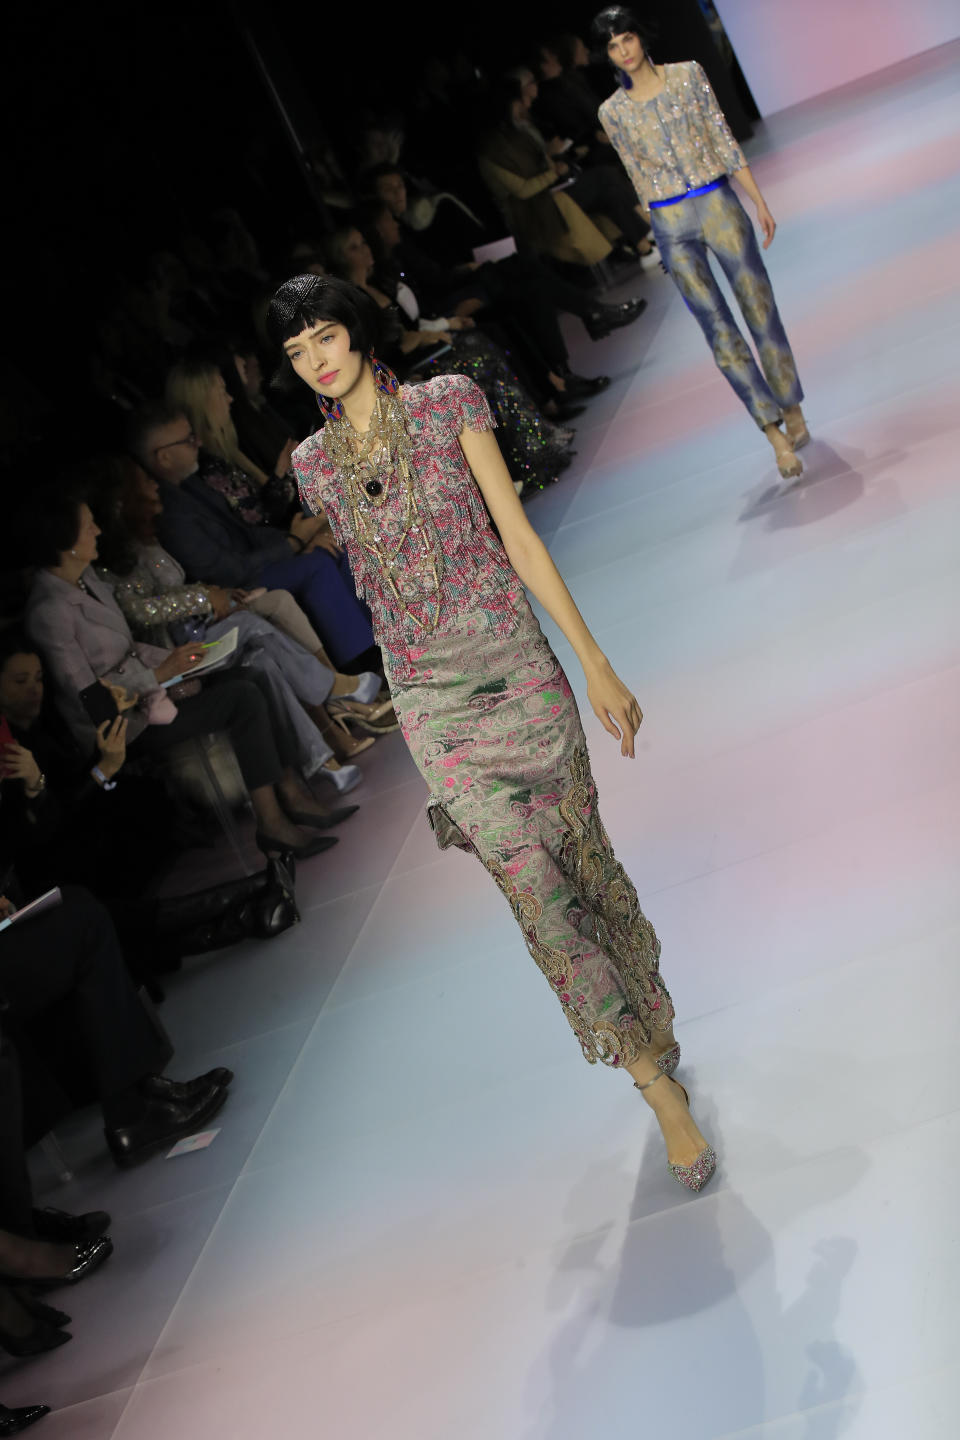 A model wears a creation for the Armani Prive Haute Couture Spring/Summer 2020 fashion collection presented Tuesday Jan. 21, 2020 in Paris. (AP Photo/Michel Euler)